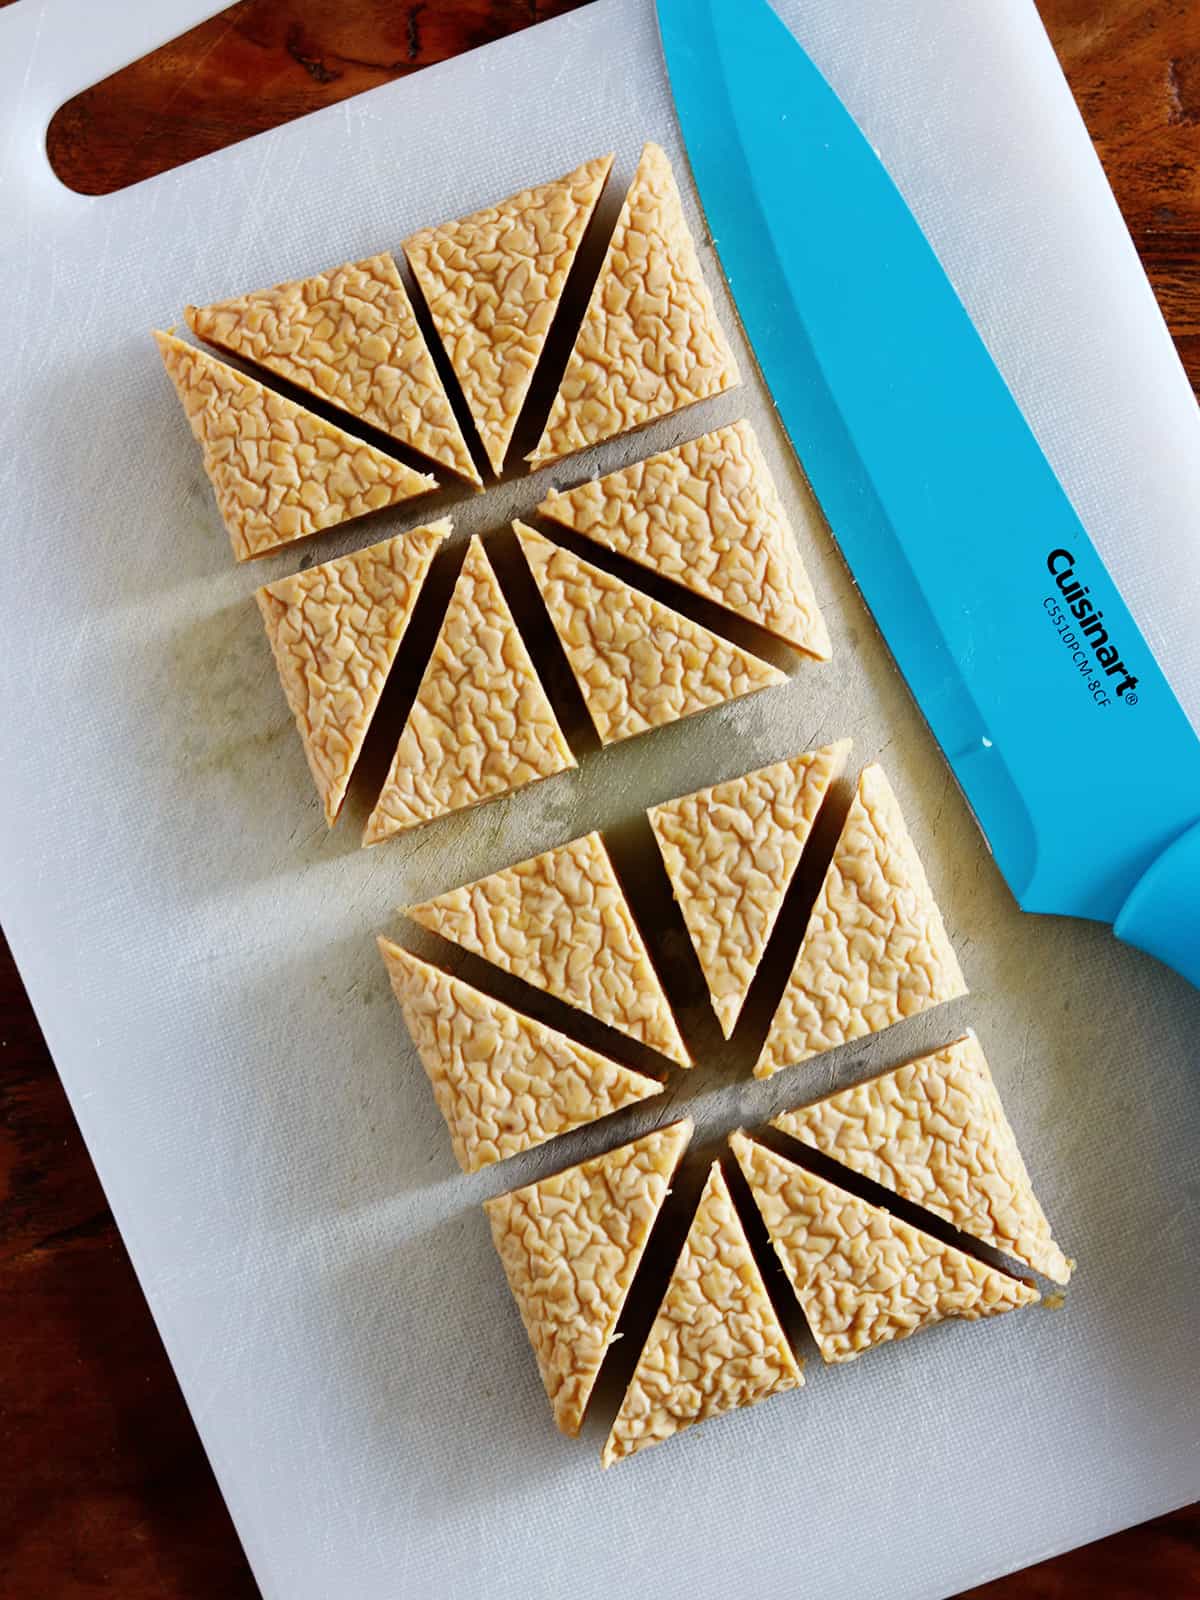 Tempeh cut into triangles on a white silicone cutting board with a light blue ceramic chef's knife.